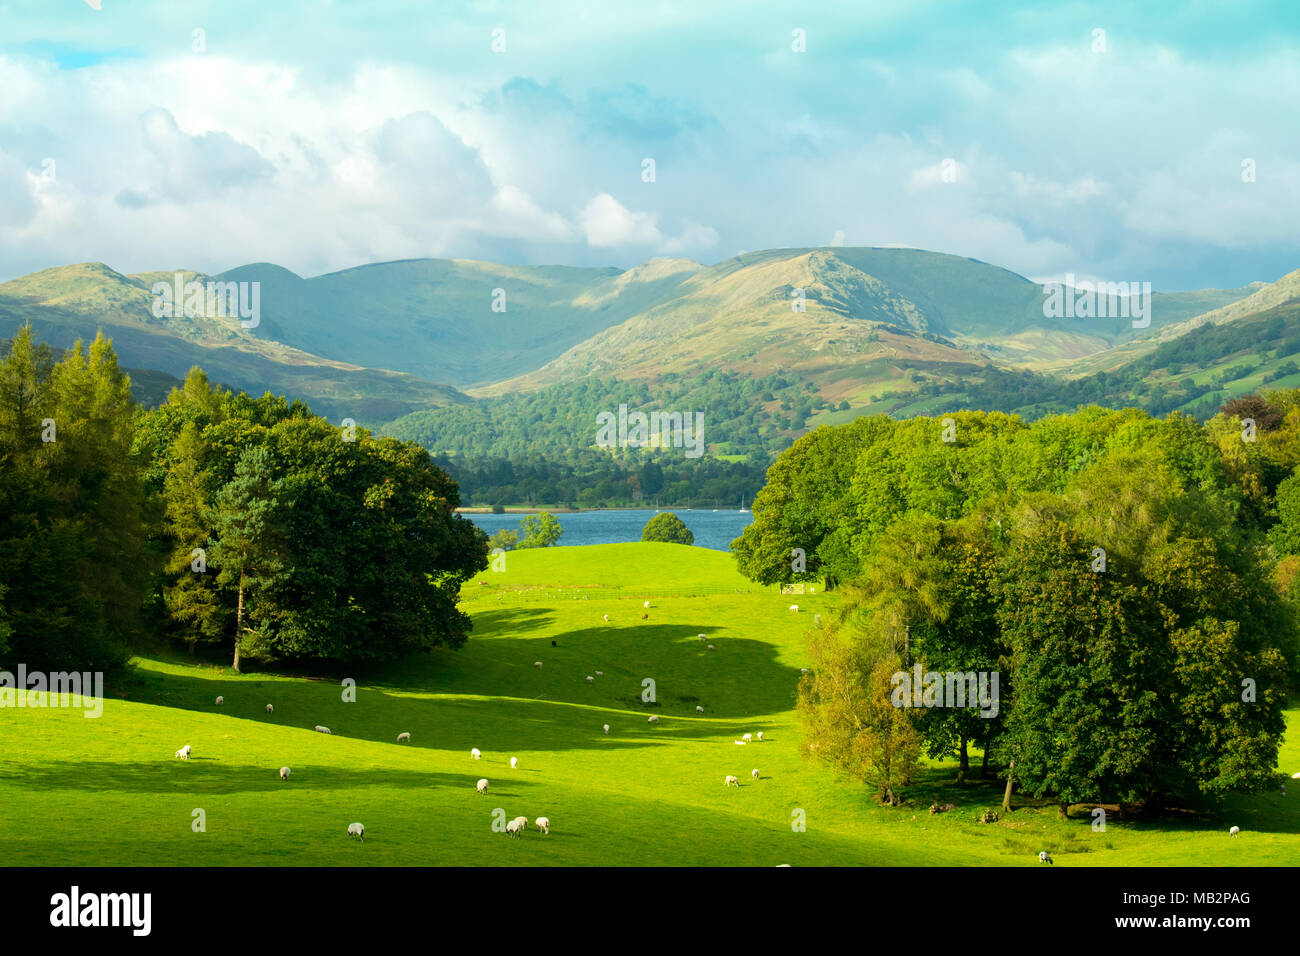 View of Fairfield Horshoe Mountain range and Lake Windermere, South Lakeland Fells, English Lake District. Blue sky view of lush green fields, hills Stock Photo